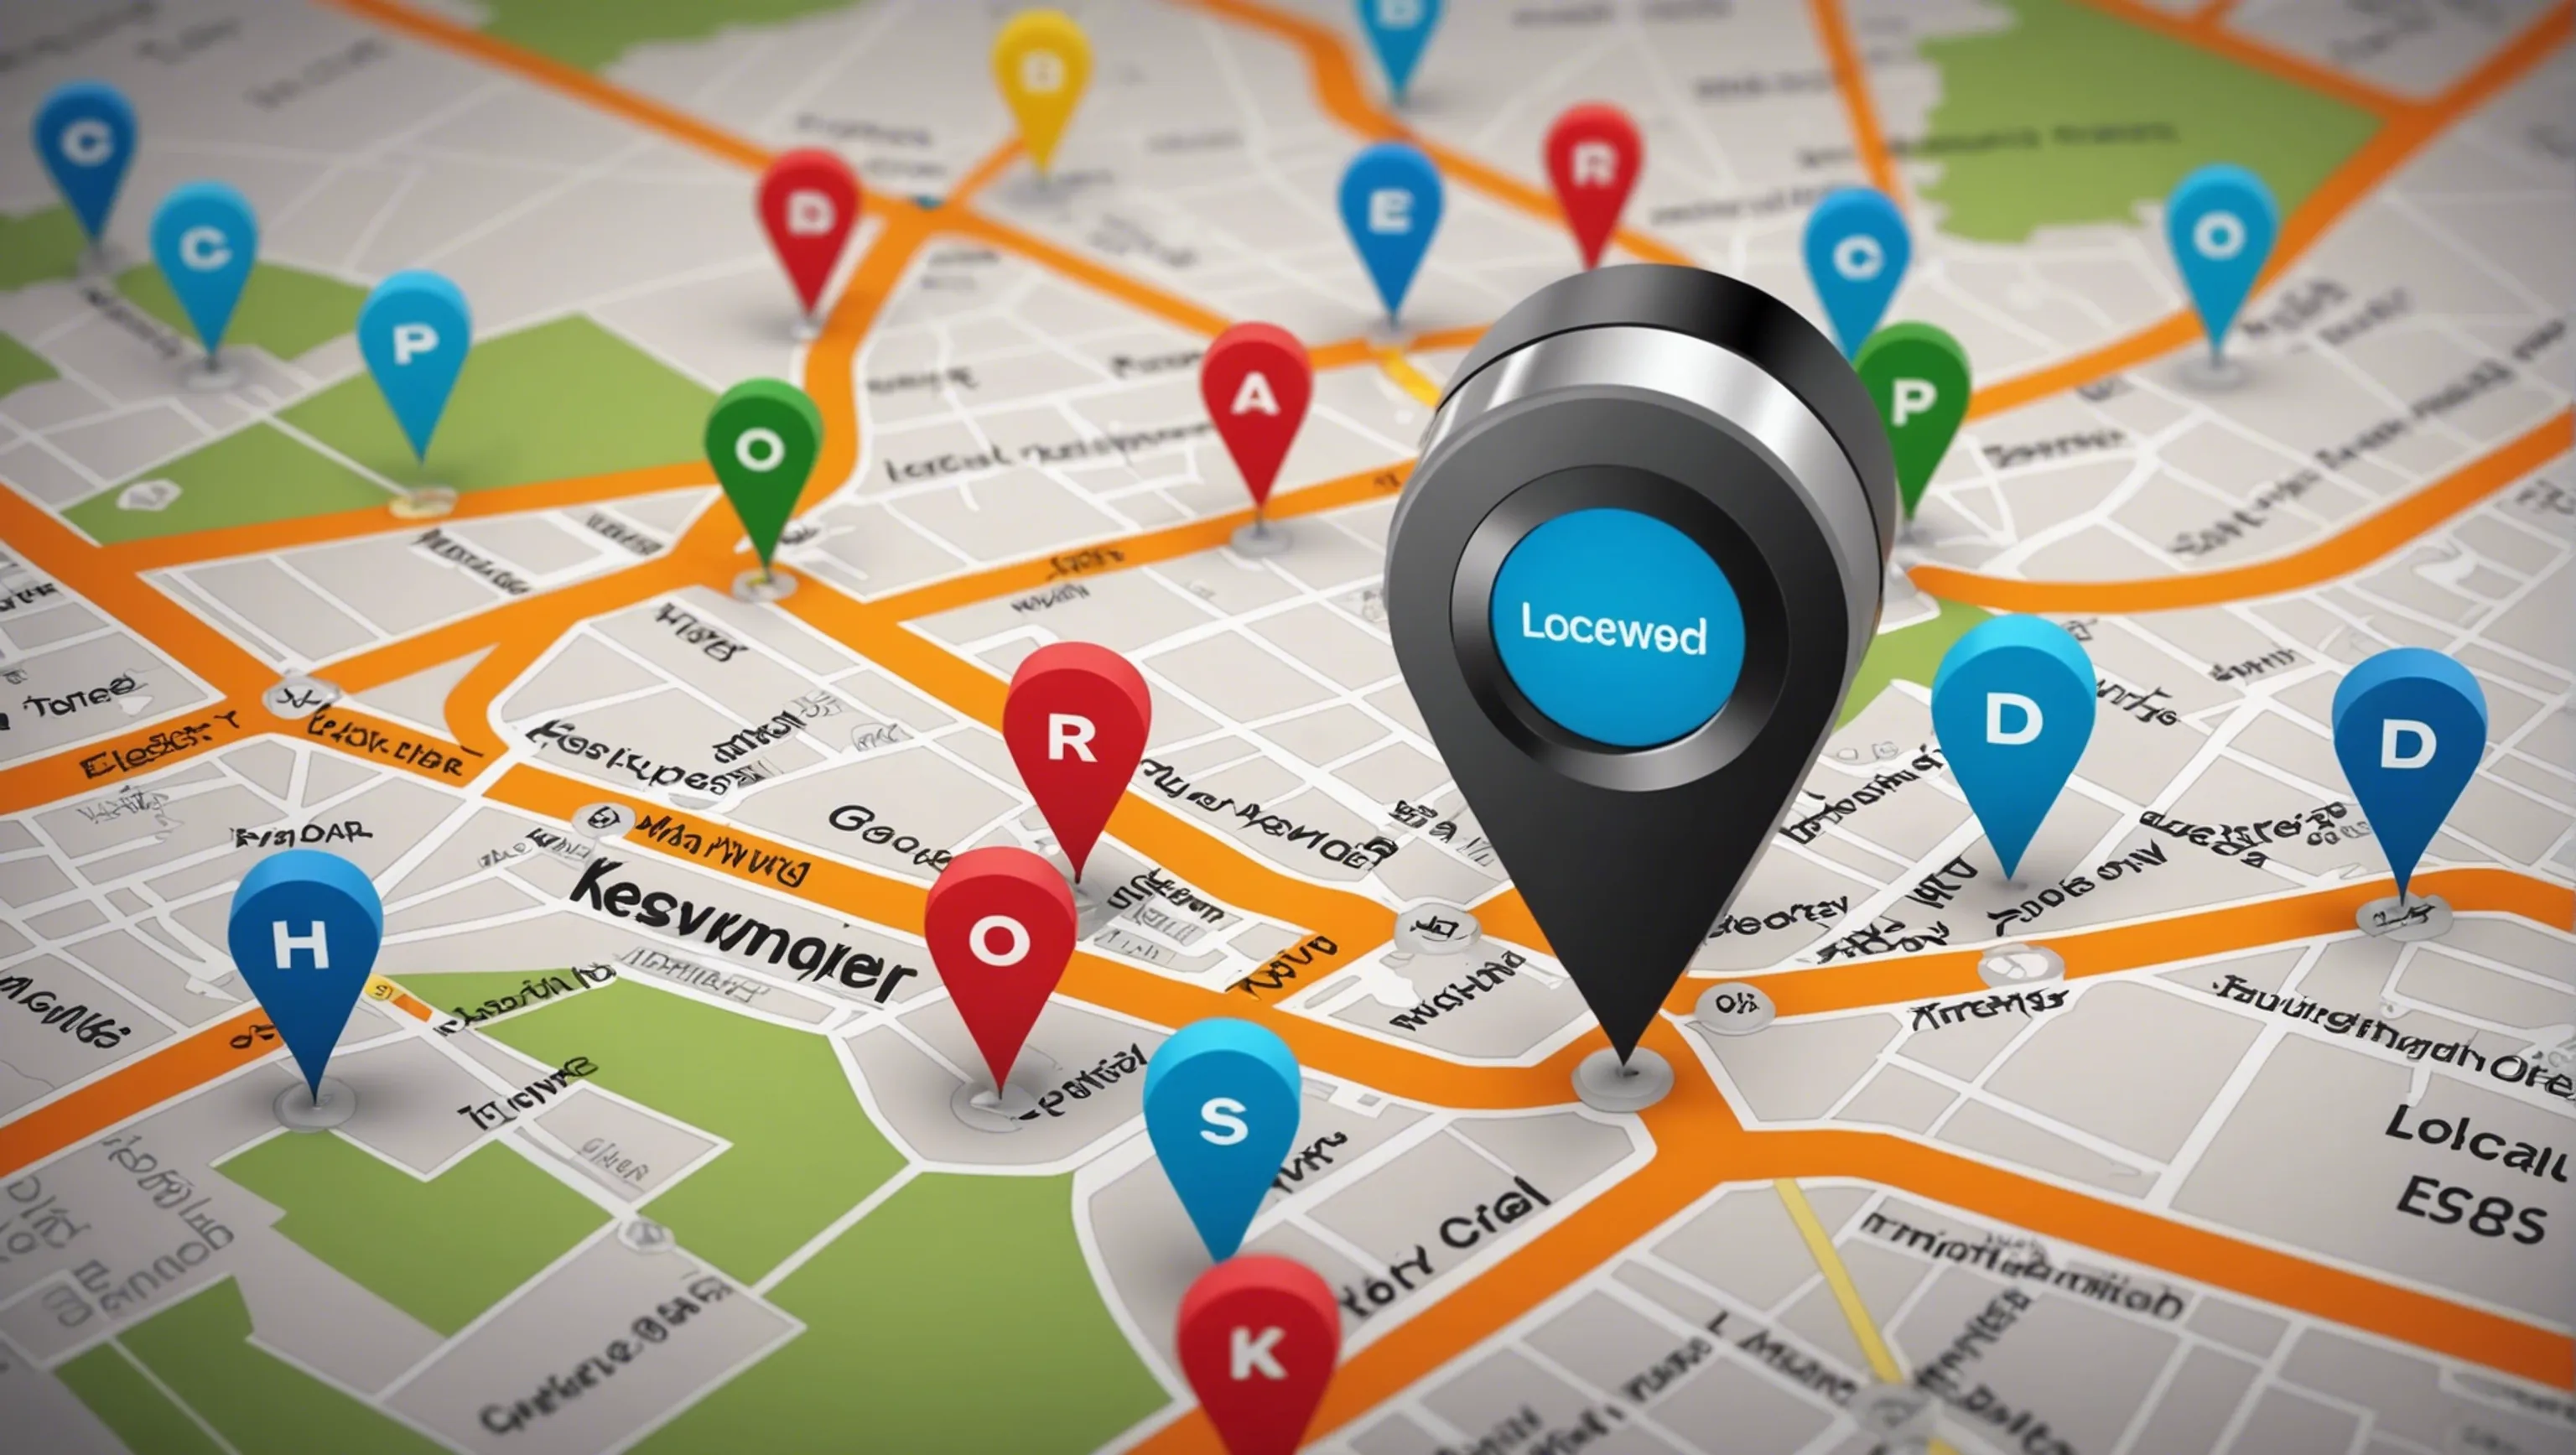 Local Keyword Targeting for Marketing Professionals